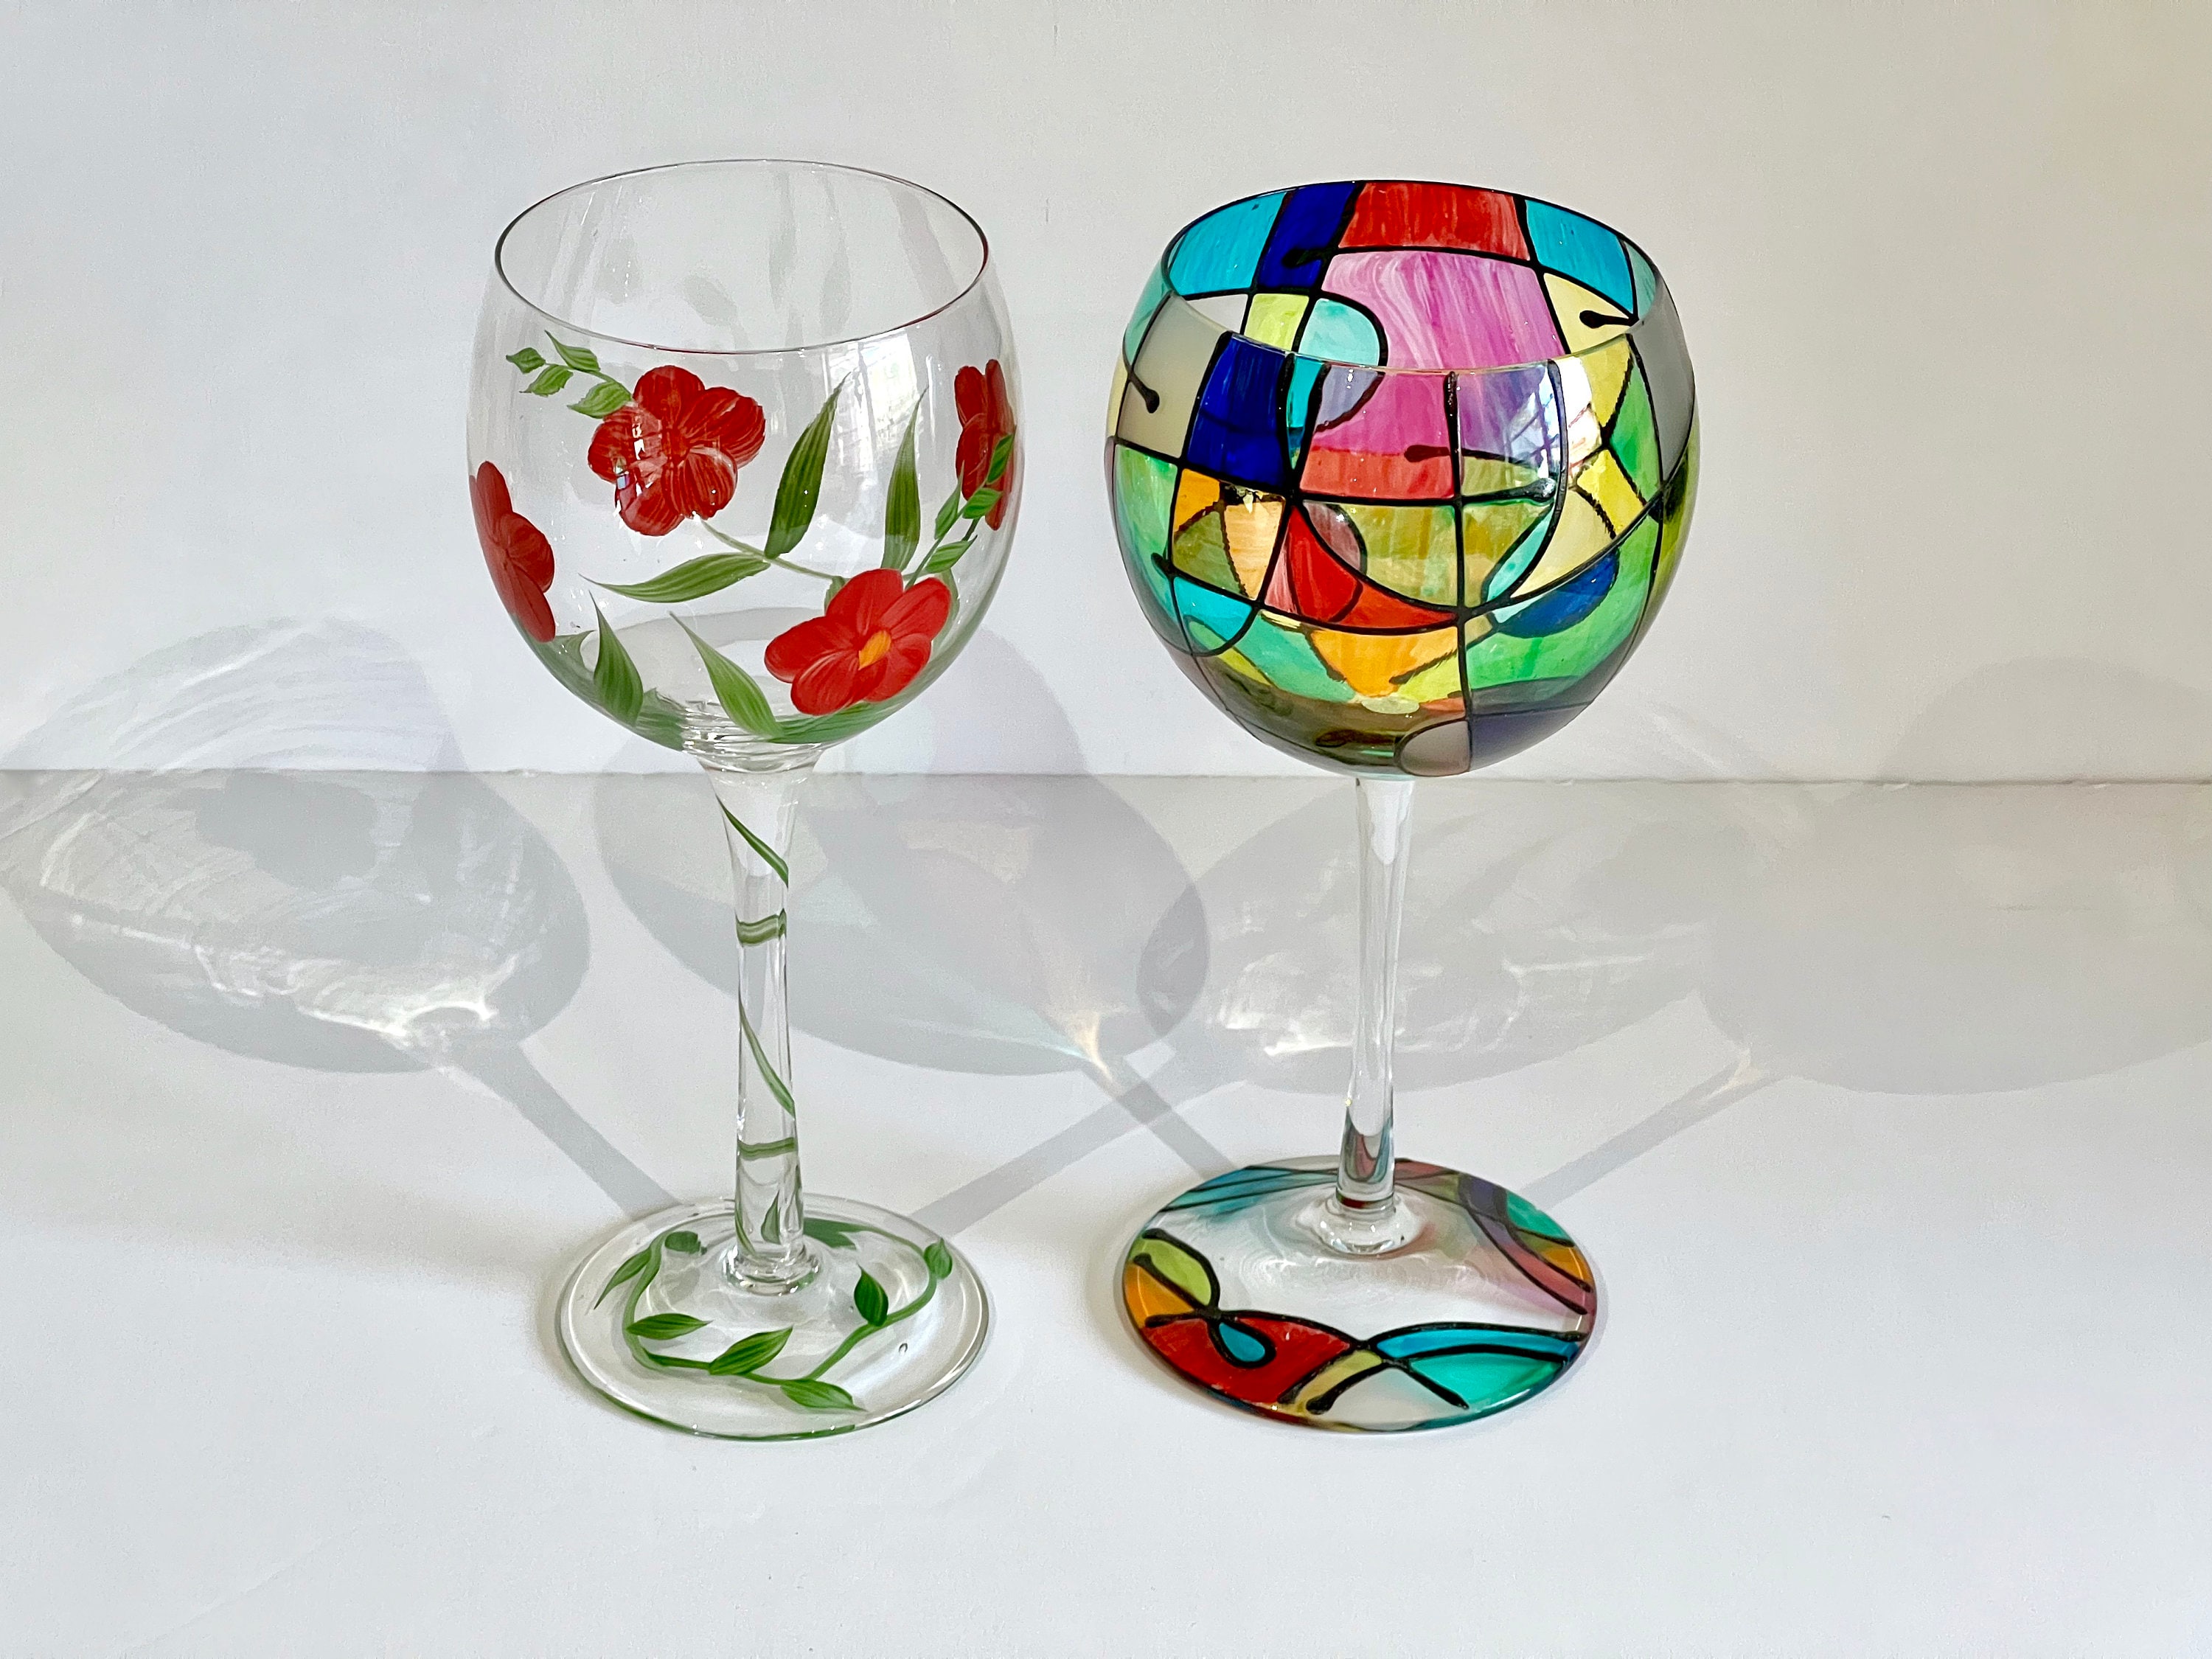 88 Glass Painting Ideas For Beginners (Updated 2022) - Bored Art  Hand painted  wine glass, Glass painting designs, Painted wine glass